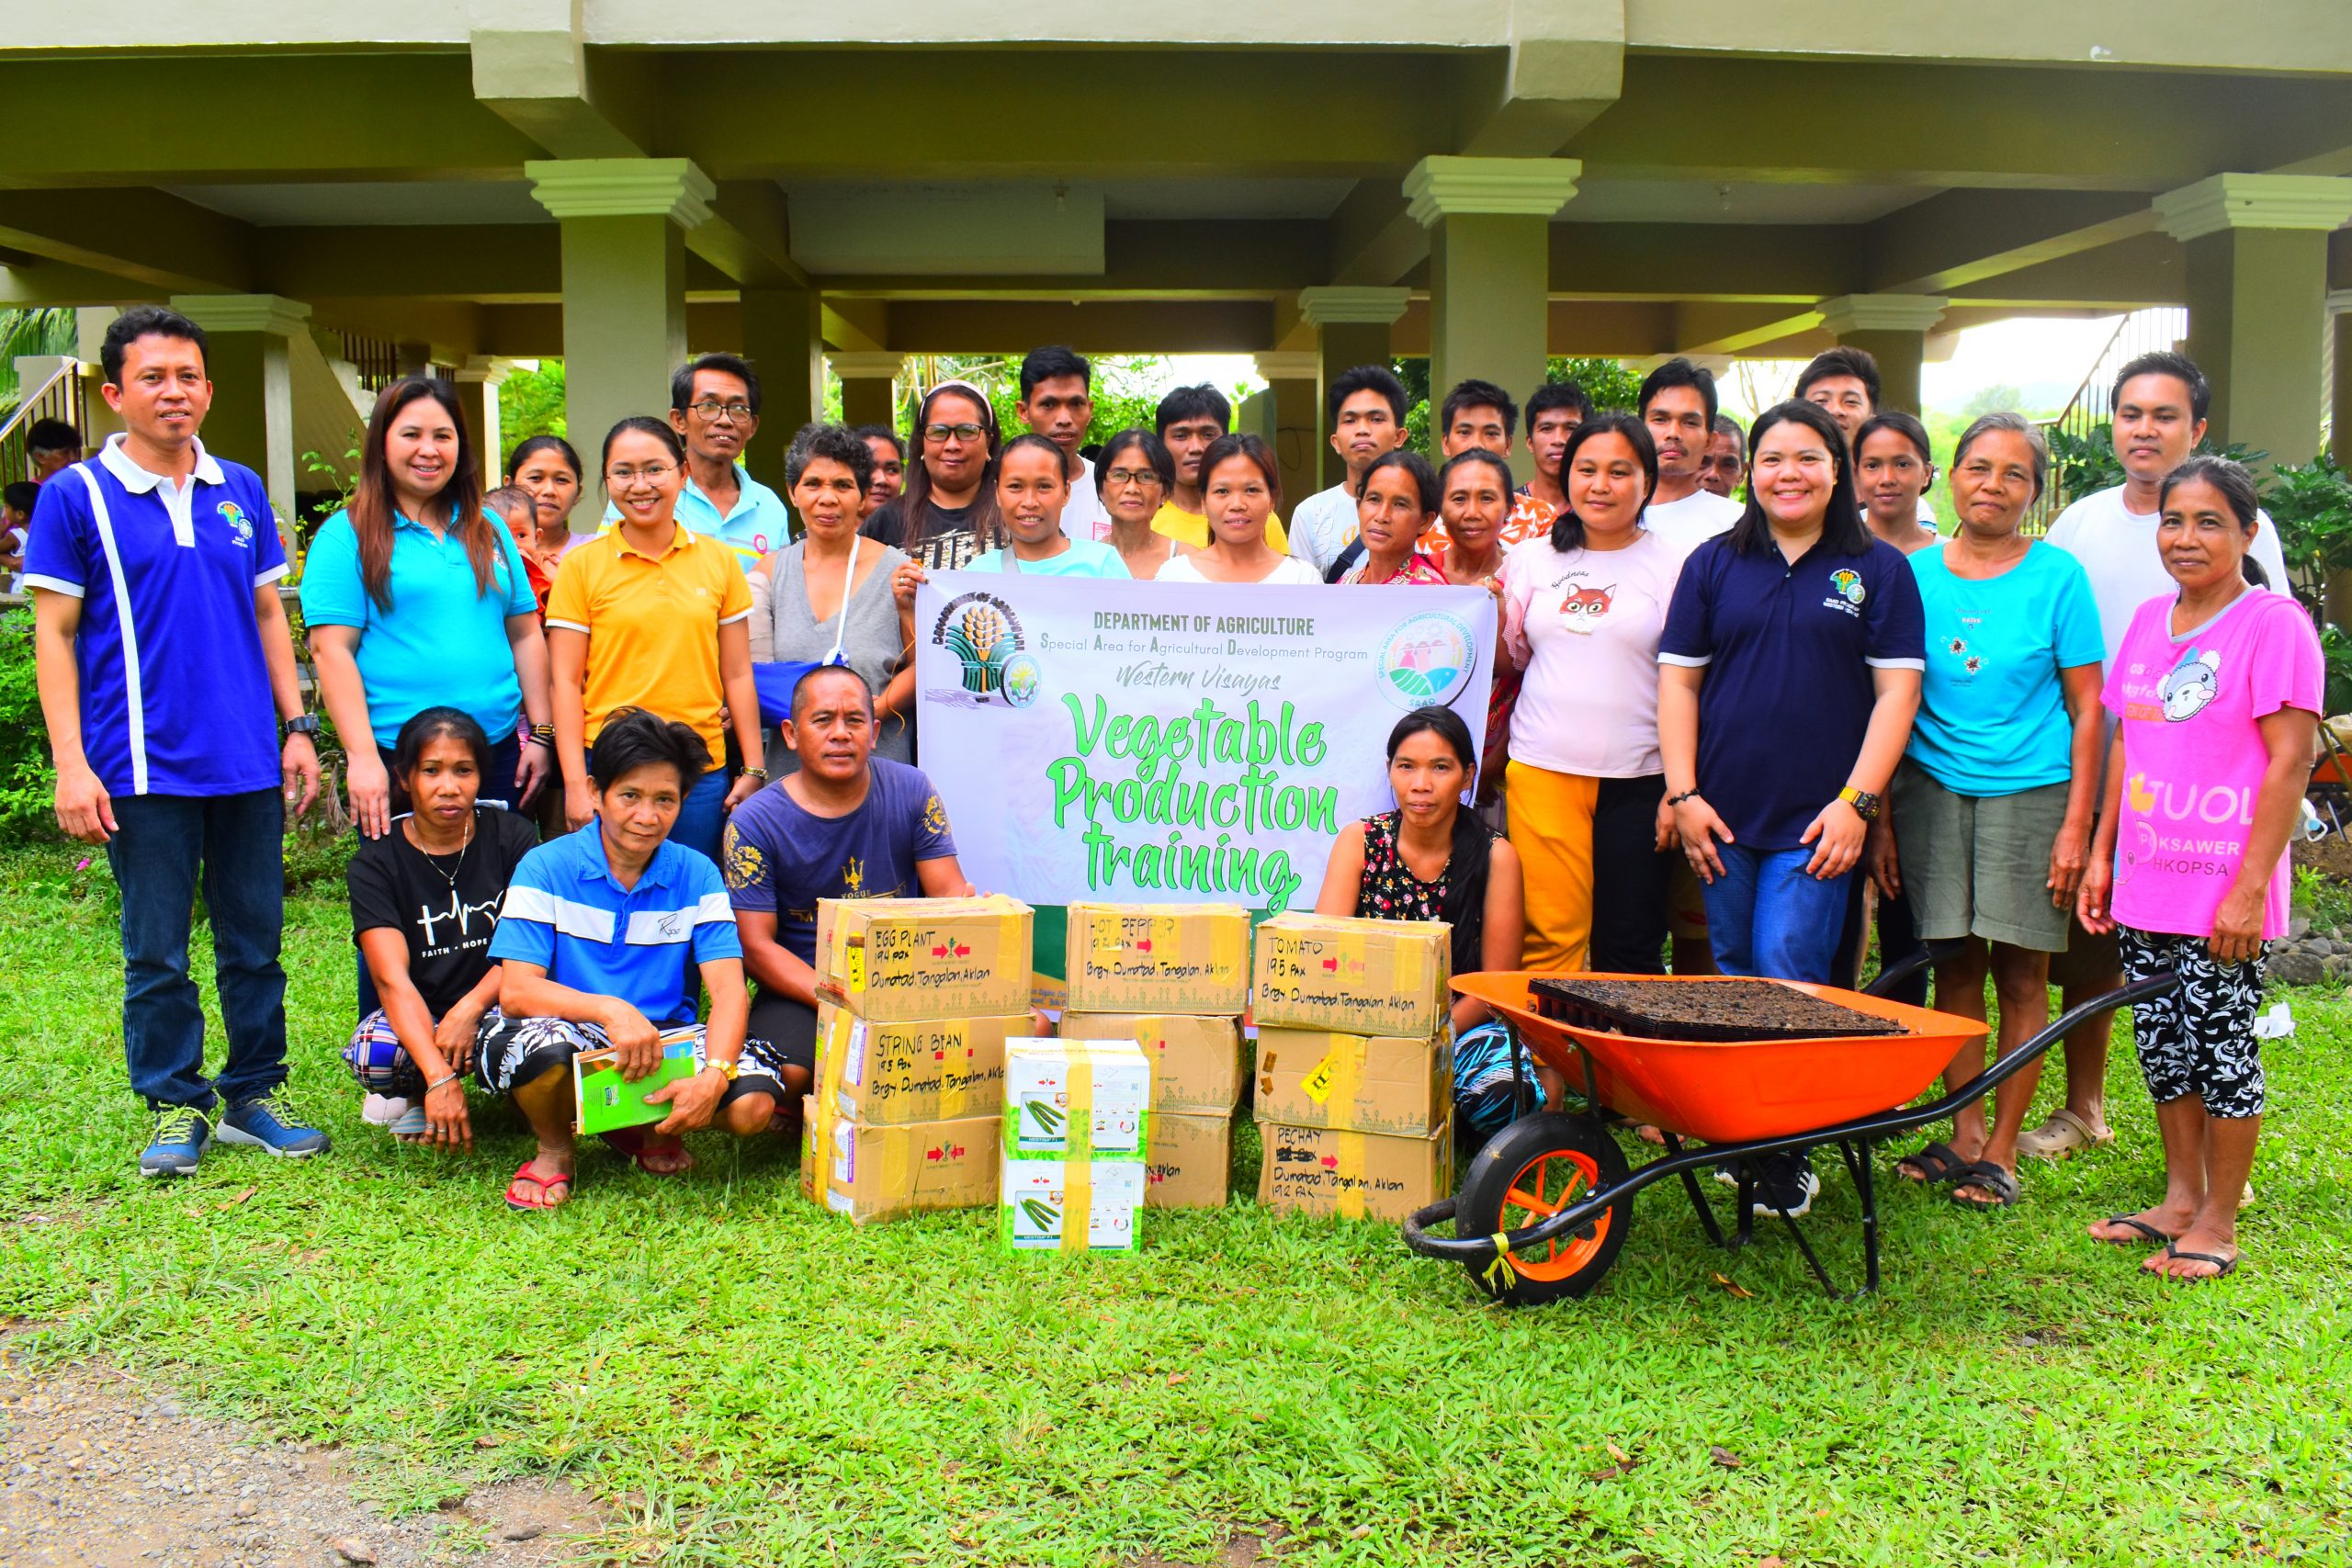 5 SAAD Phase 2 FAs from Aklan, Iloilo, Guimaras underwent vegetable production training